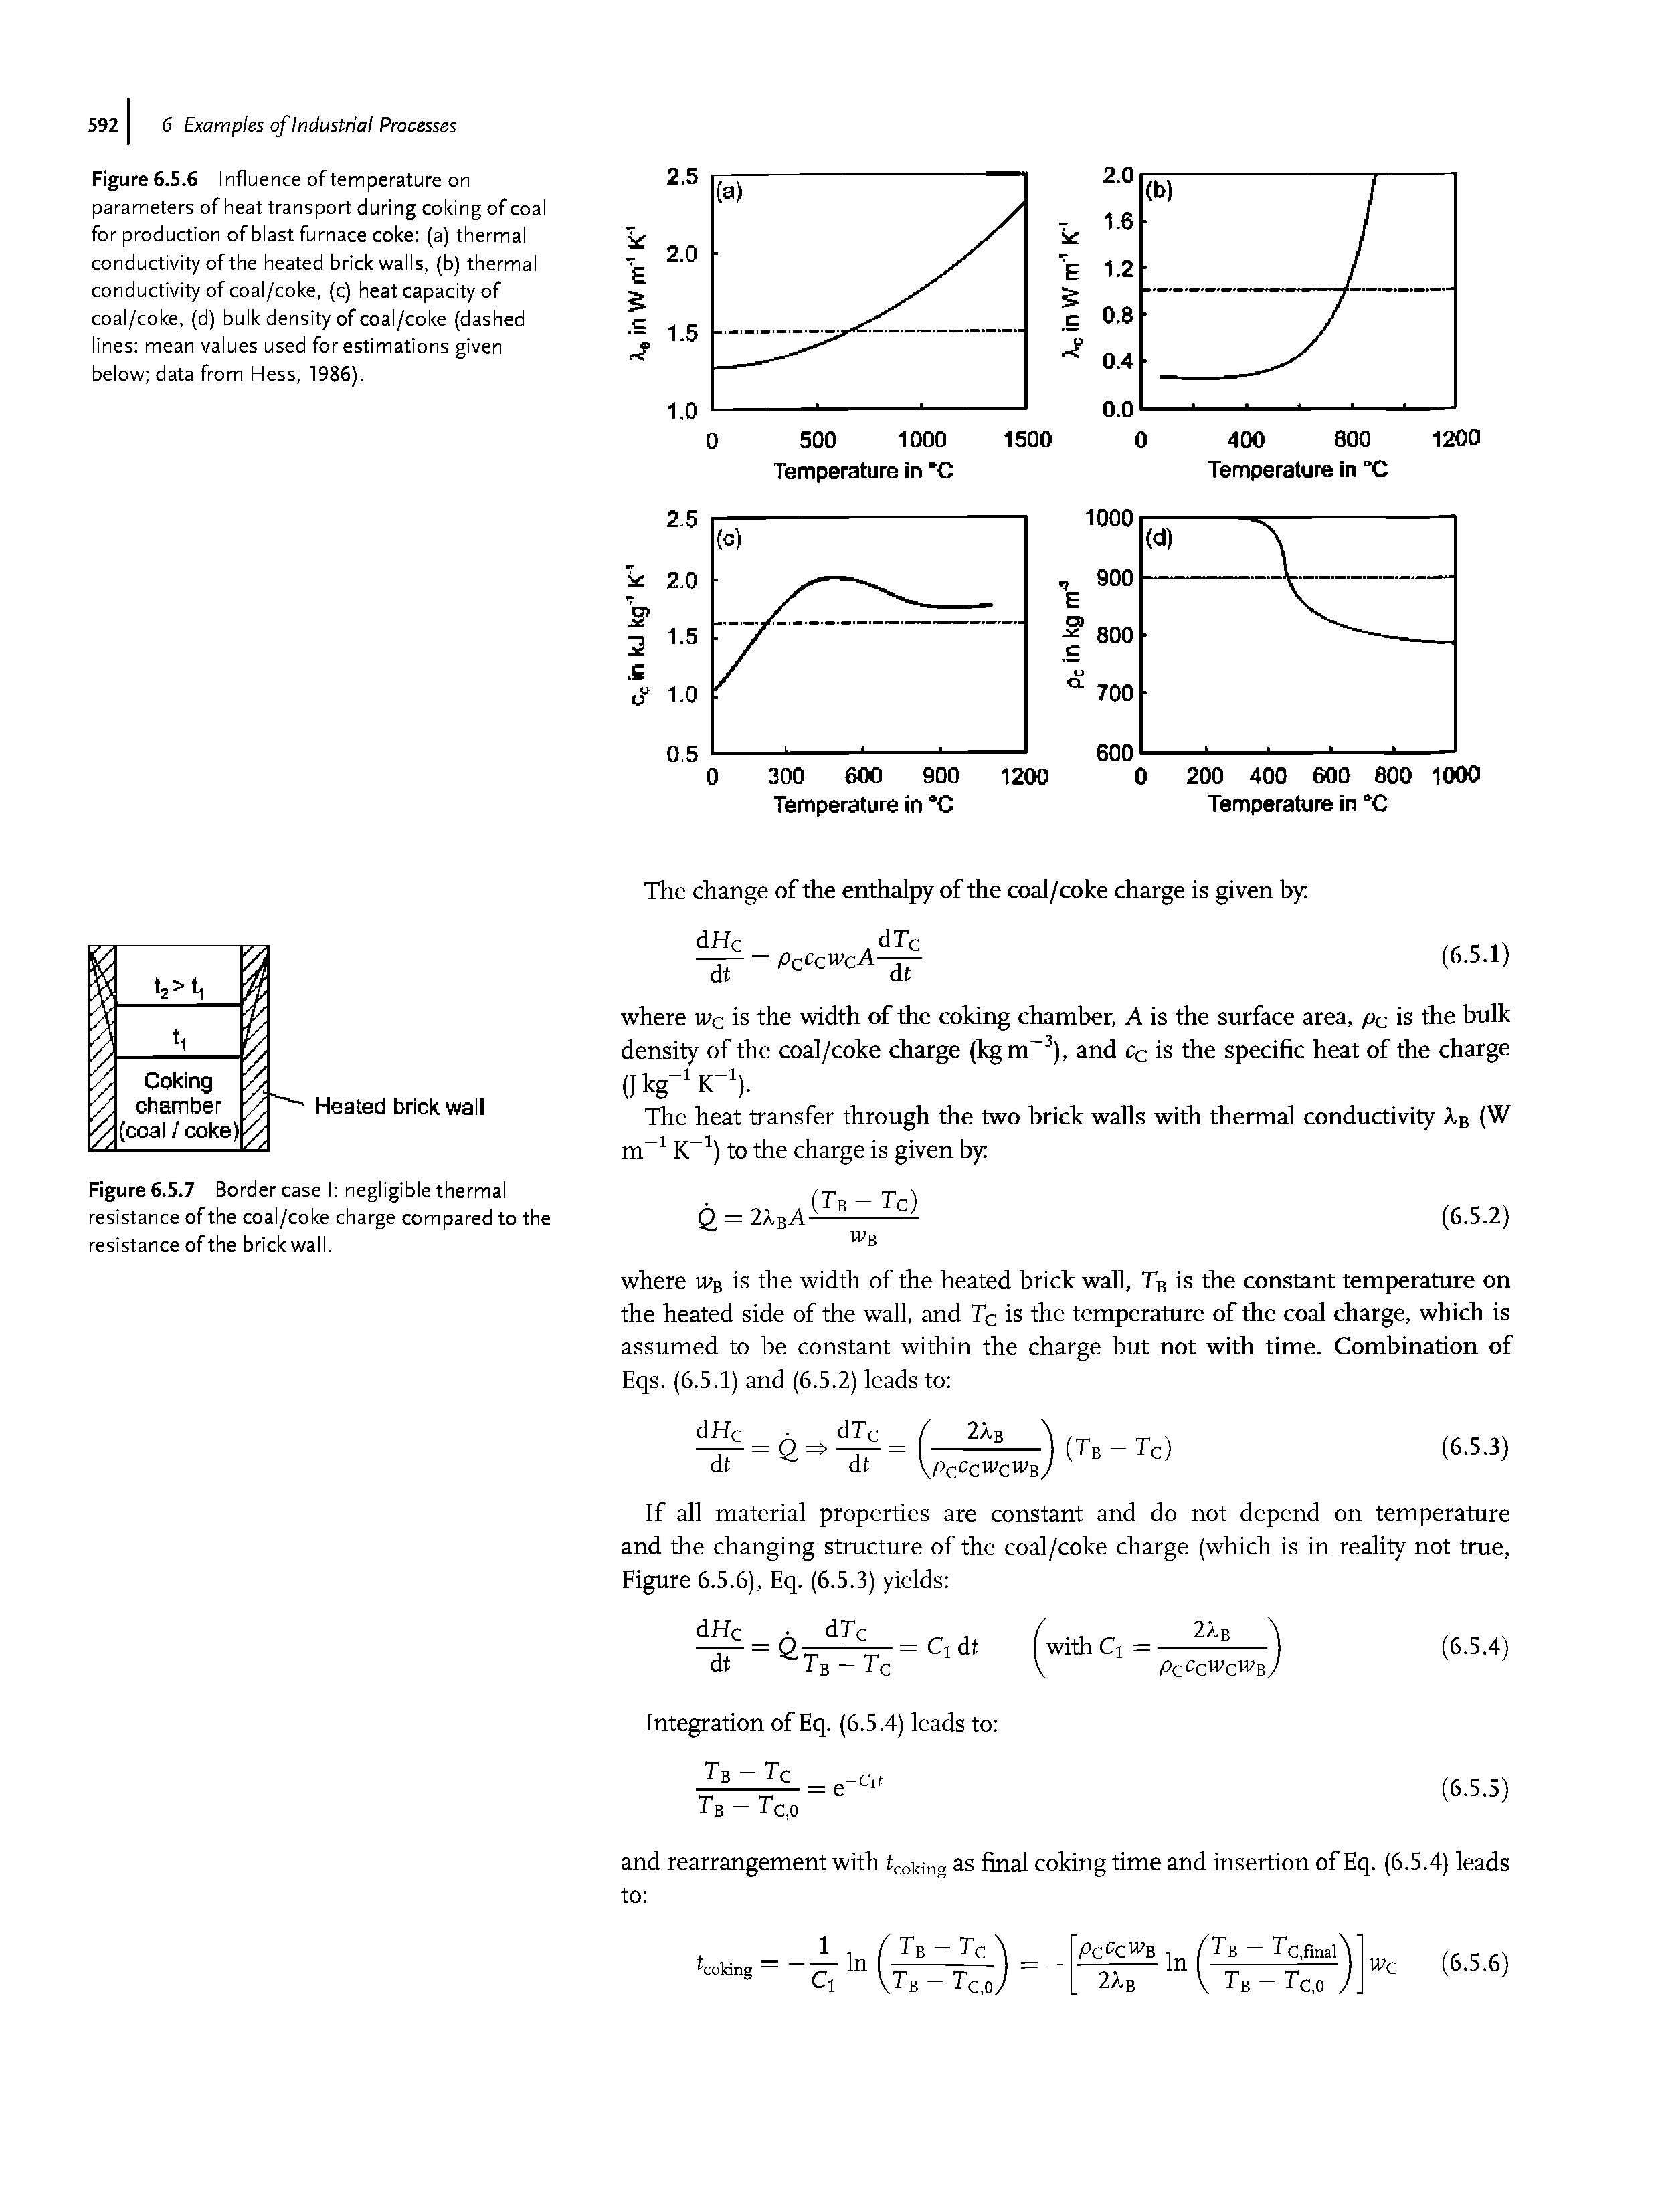 Figure 6.5.6 Influence of temperature on parameters of heat transport during coking of coal for production of blast furnace coke (a) thermal conductivity of the heated brick walls, (b) thermal conductivity of coal/coke, (c) heat capacity of coal/coke, (d) bulk density of coal/coke (dashed lines mean values used for estimations given below data from Hess, 1986).